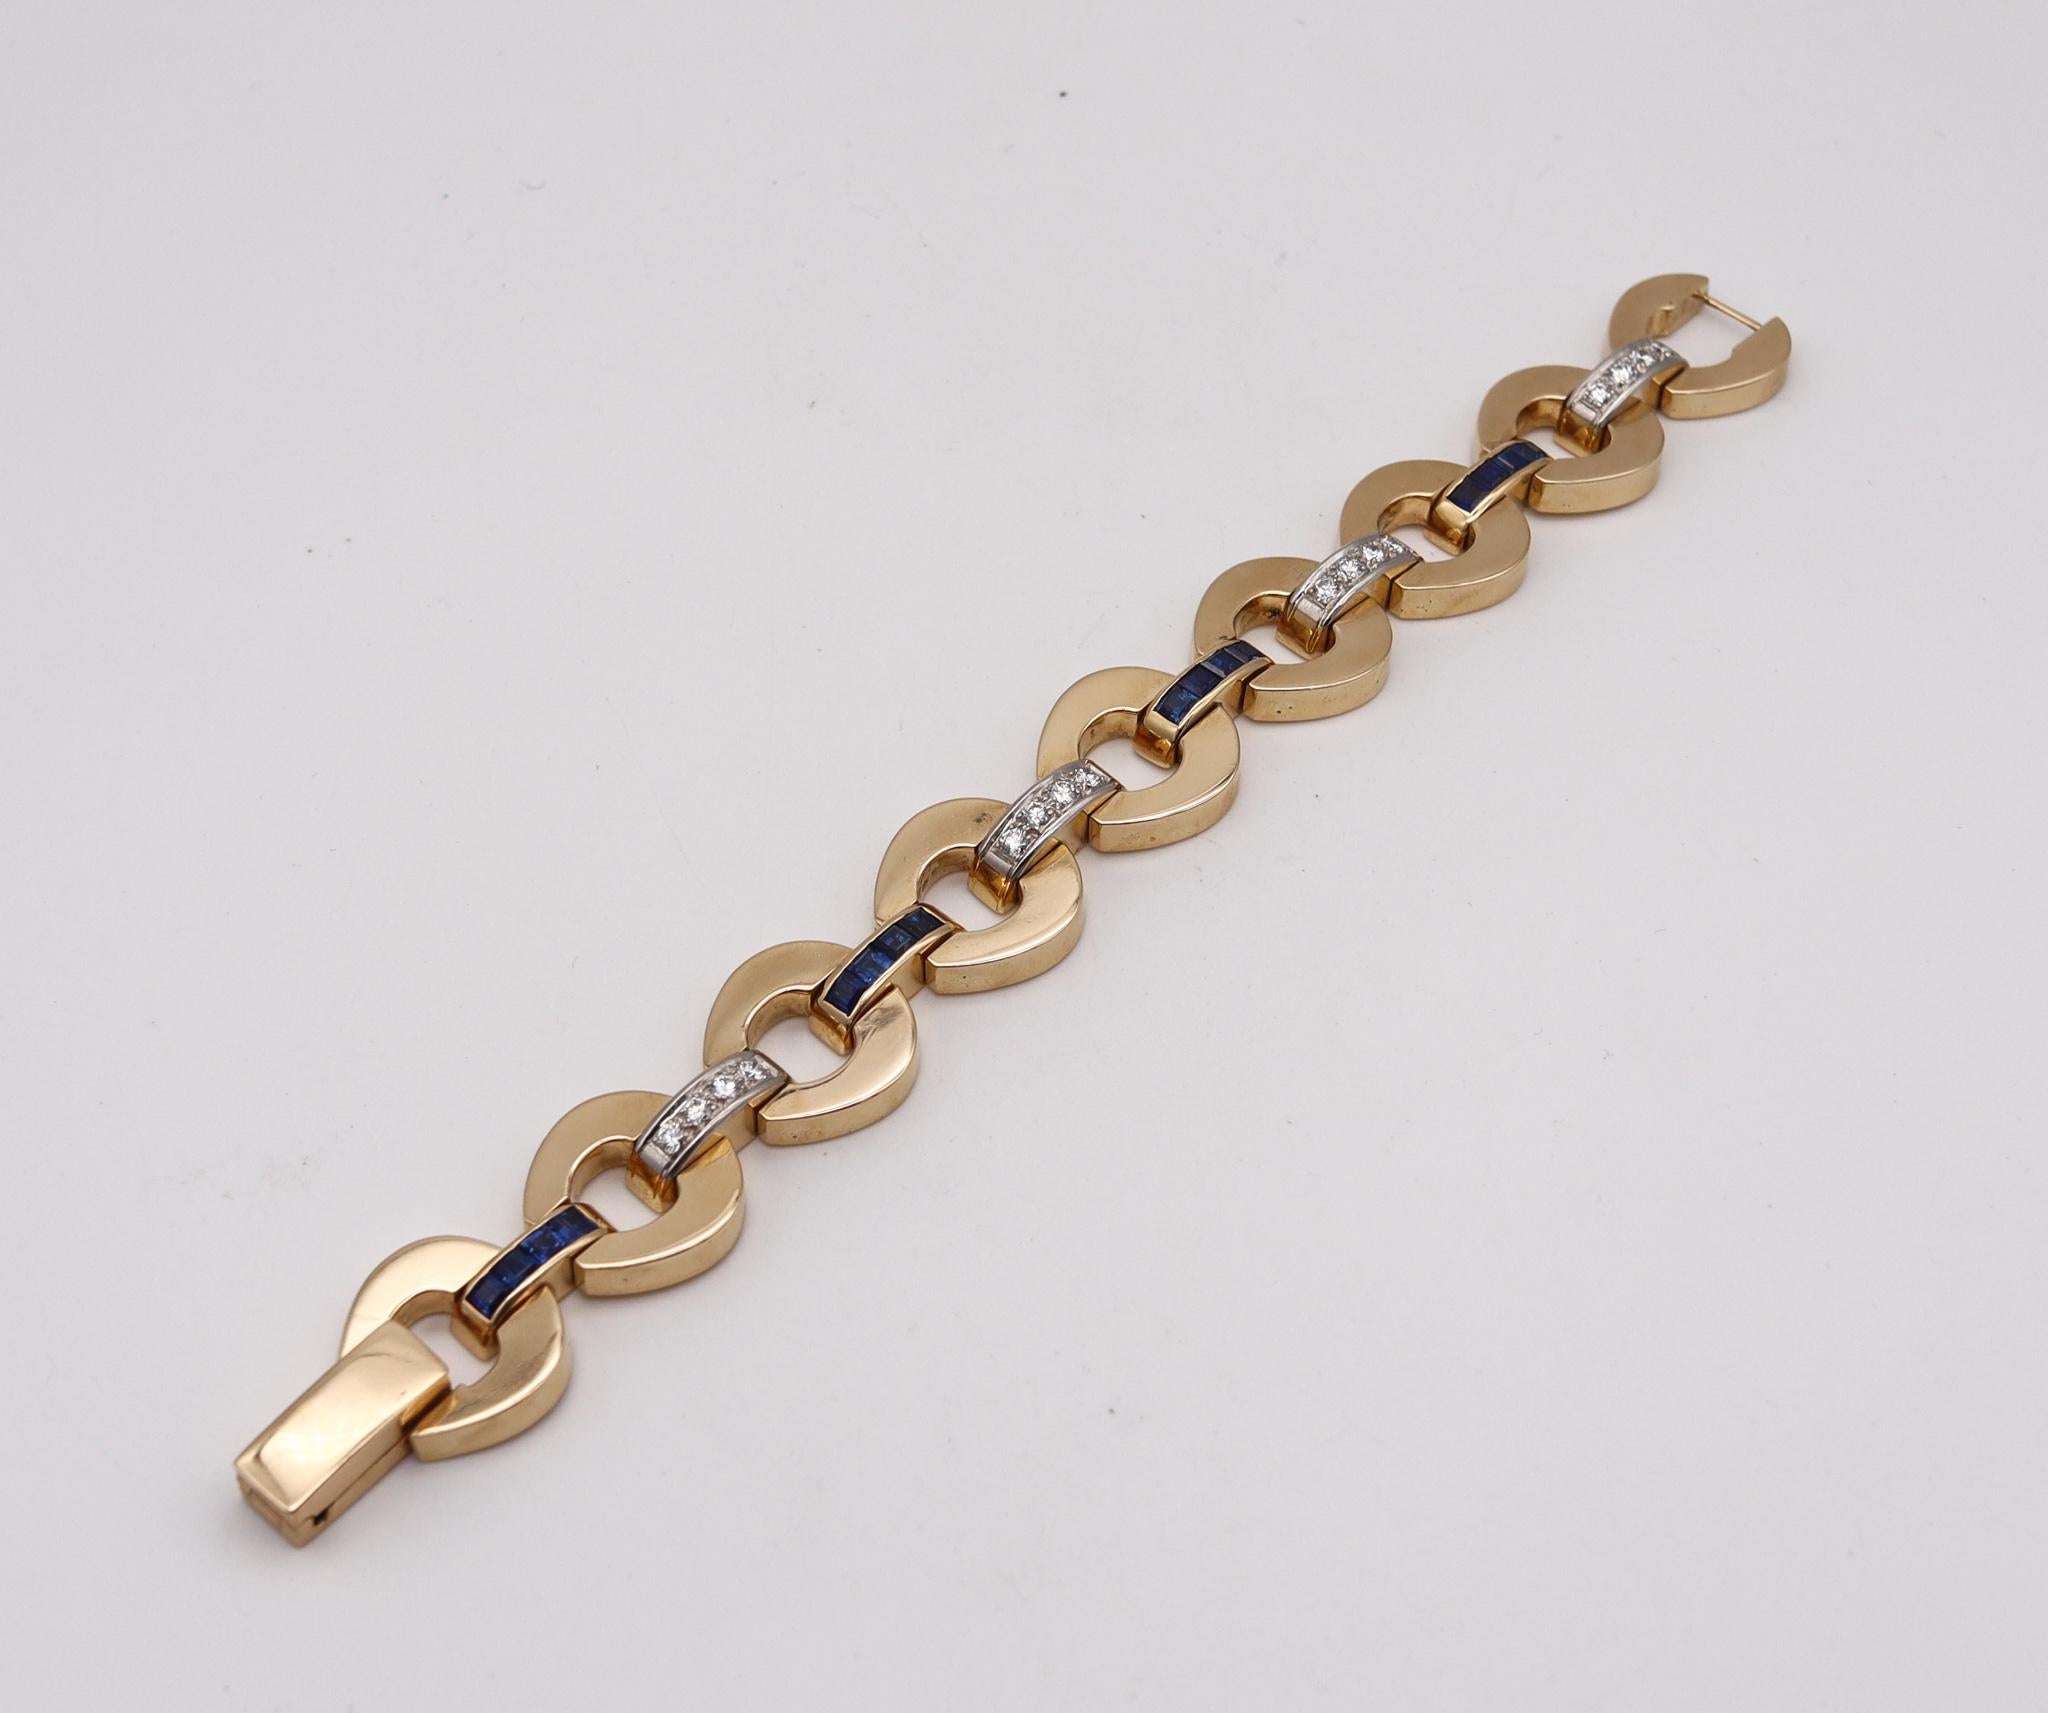 Brilliant Cut Retro Modernist Bracelet in 14Kt Yellow Gold with 6.56 Ctw Diamonds & Sapphires For Sale